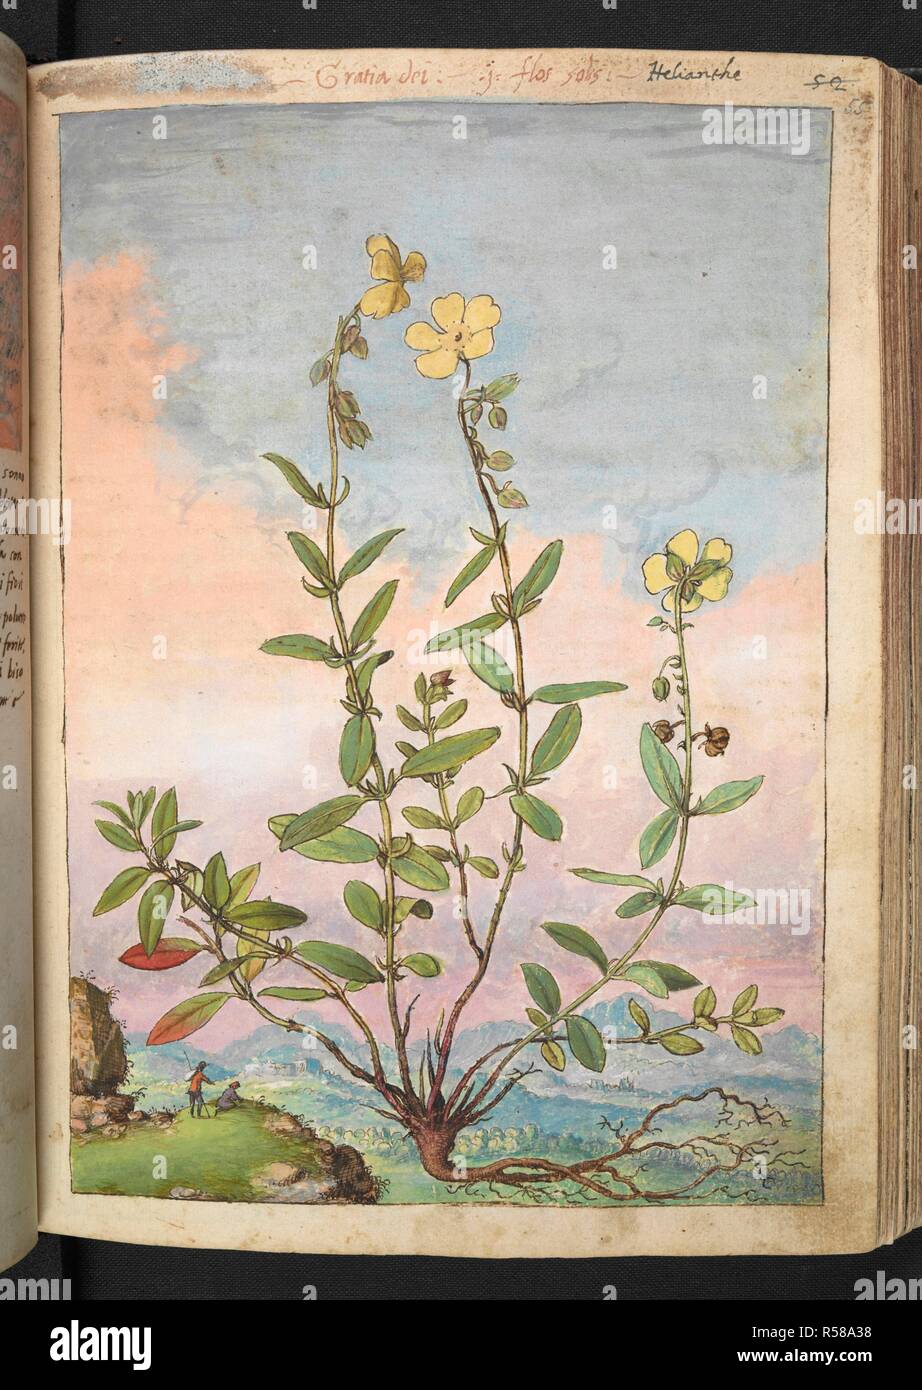 'Helianthe.' Helianthus or sunflowers.  A genus of plants in the family Asteraceae. Coloured drawings of plants, copied from nature in the Roman States, by Gerardo Cibo. Vol. I. Pietro Andrea Mattioli, Physician, of Siena: Extracts from his edition of Dioscorides' 'de re Medica':. Italy, c. 1564-1584. Source: Add. 22332 f.55. Language: Italian. Author: Cibo, Gheraldo. Stock Photo